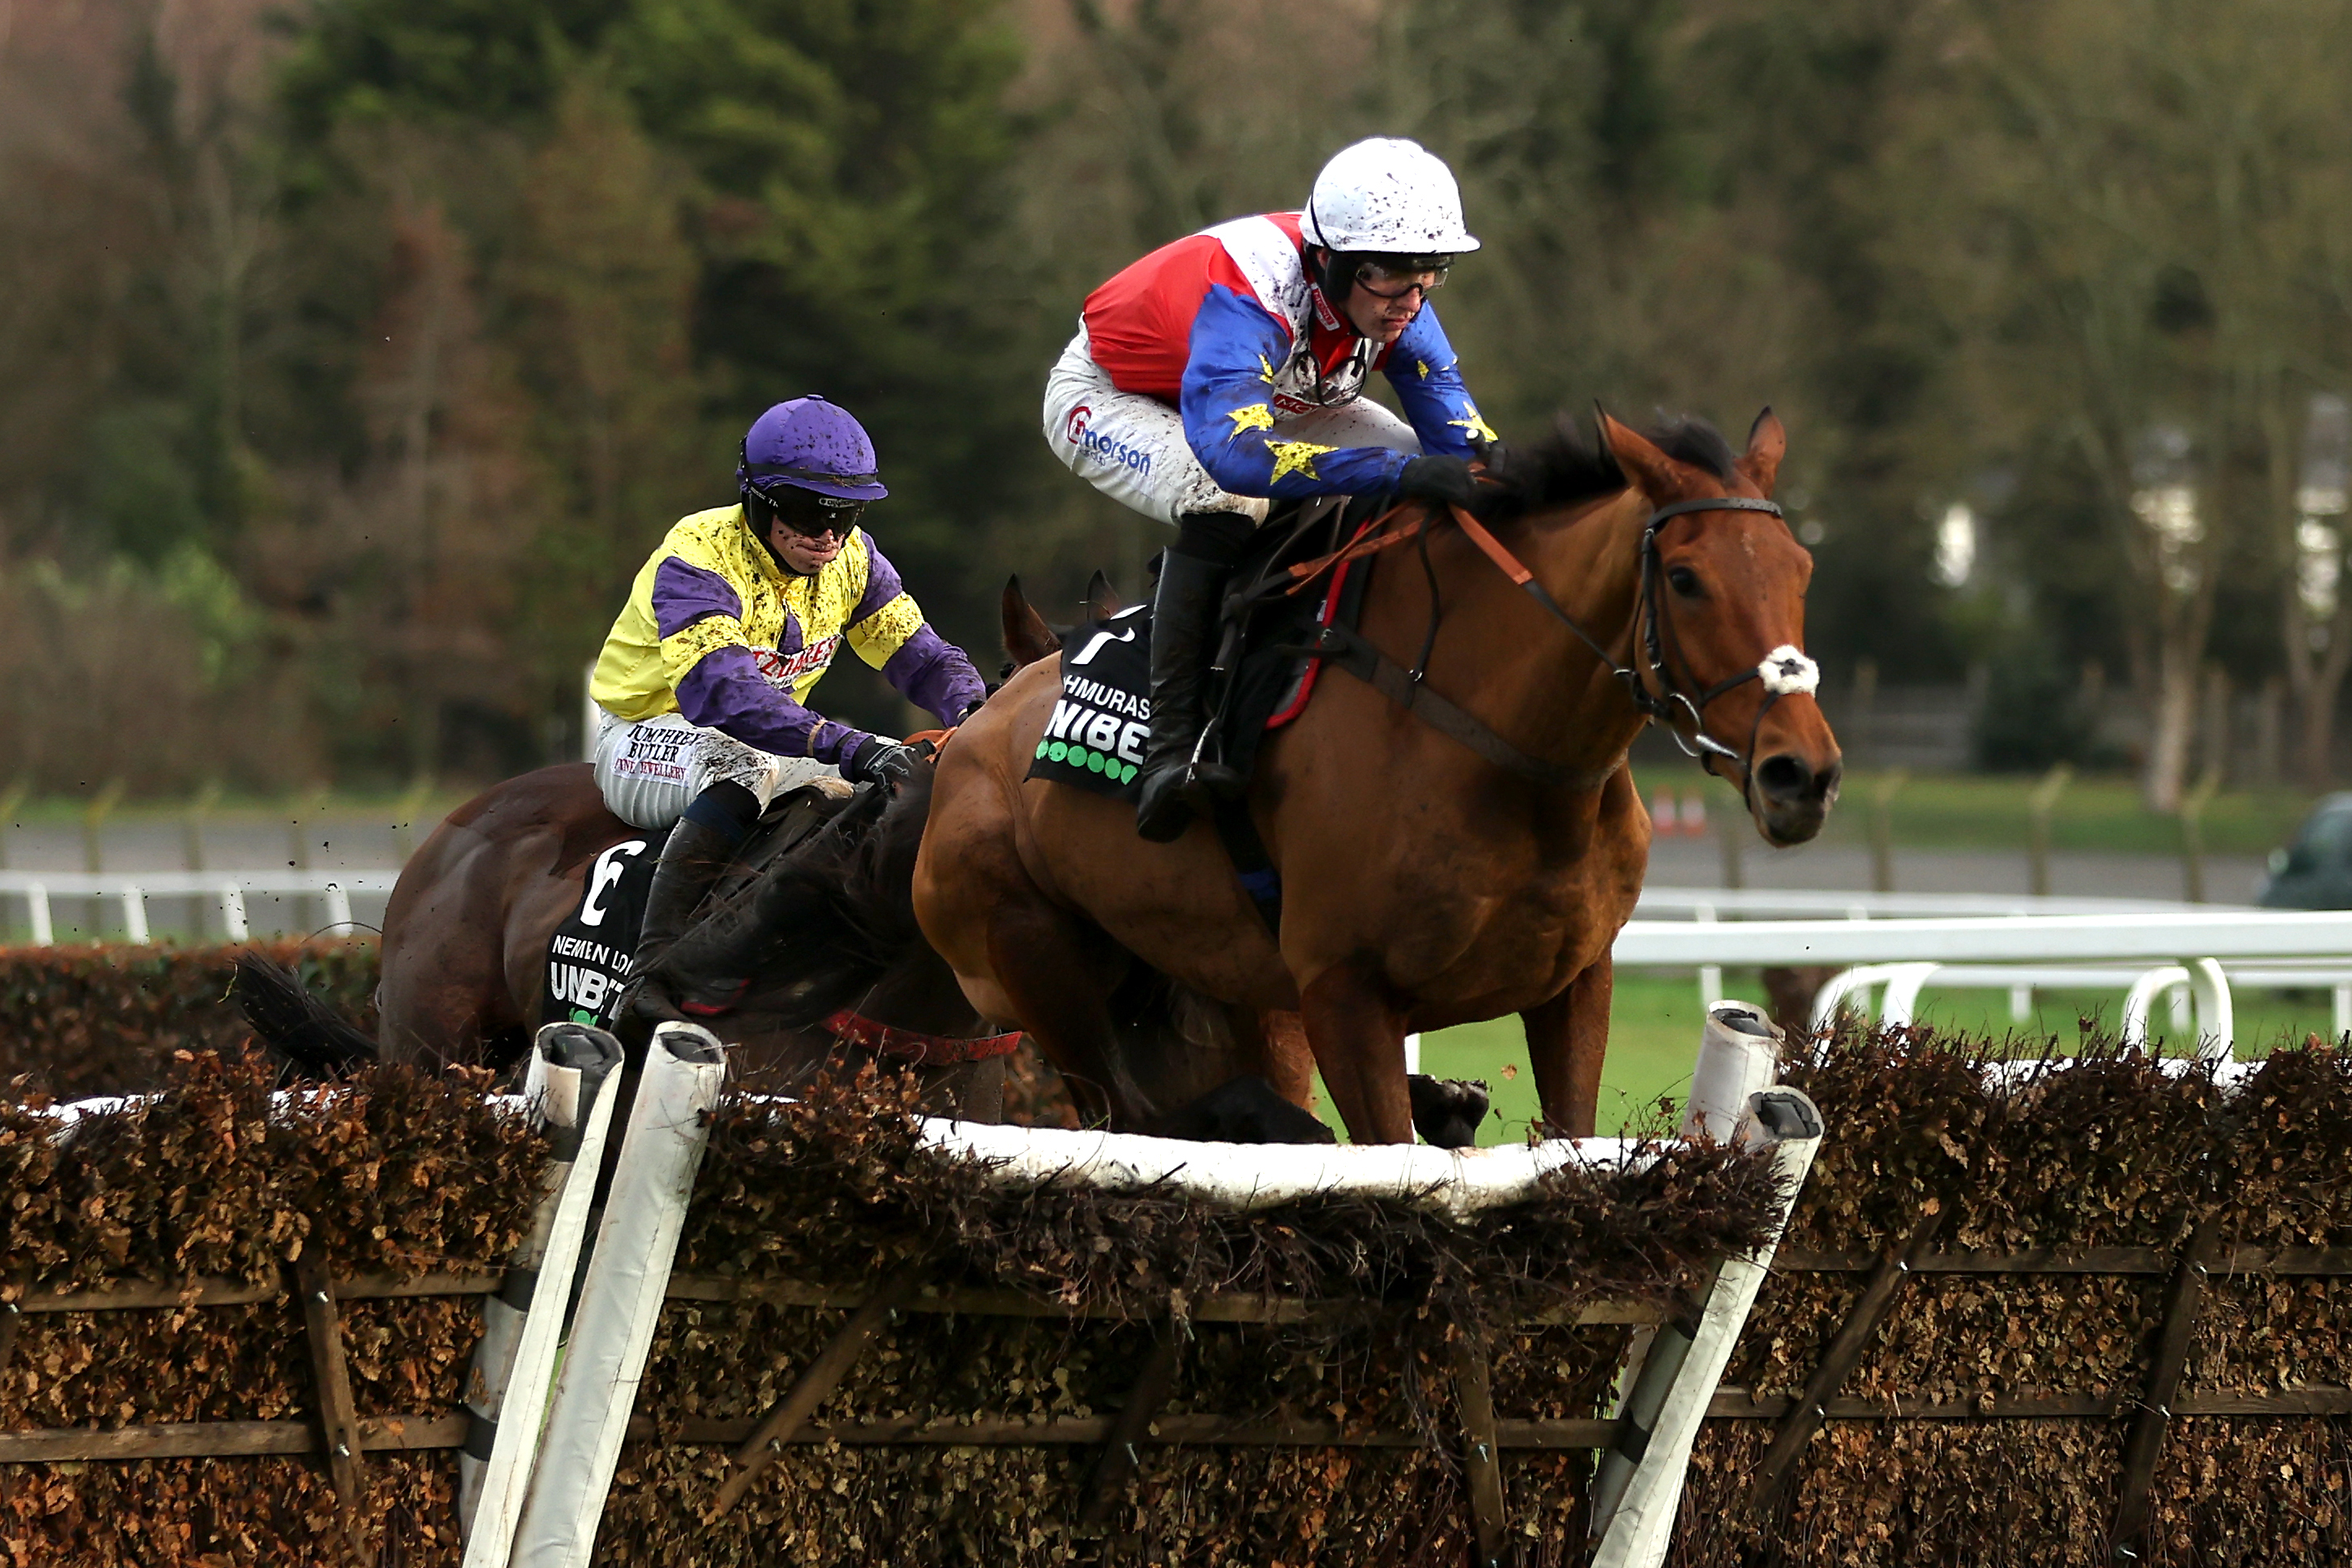 Tahmuras was an impressive winner of the Tolworth Hurdle